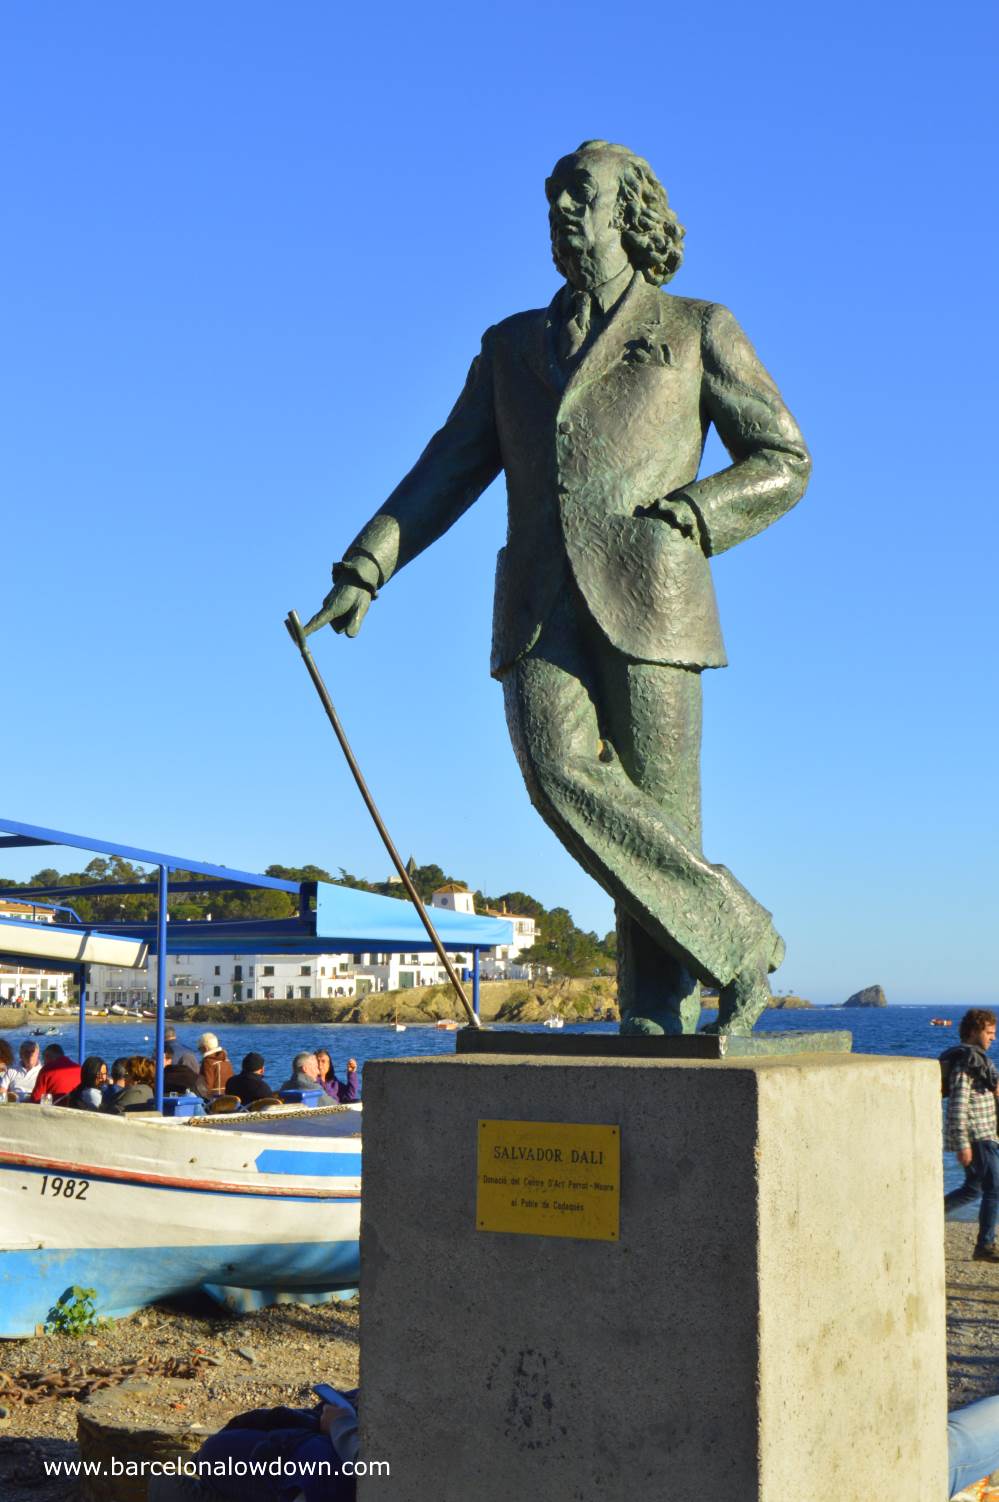 Bronze statue of Salvador Dalí which was donated to the town of Cadaqués